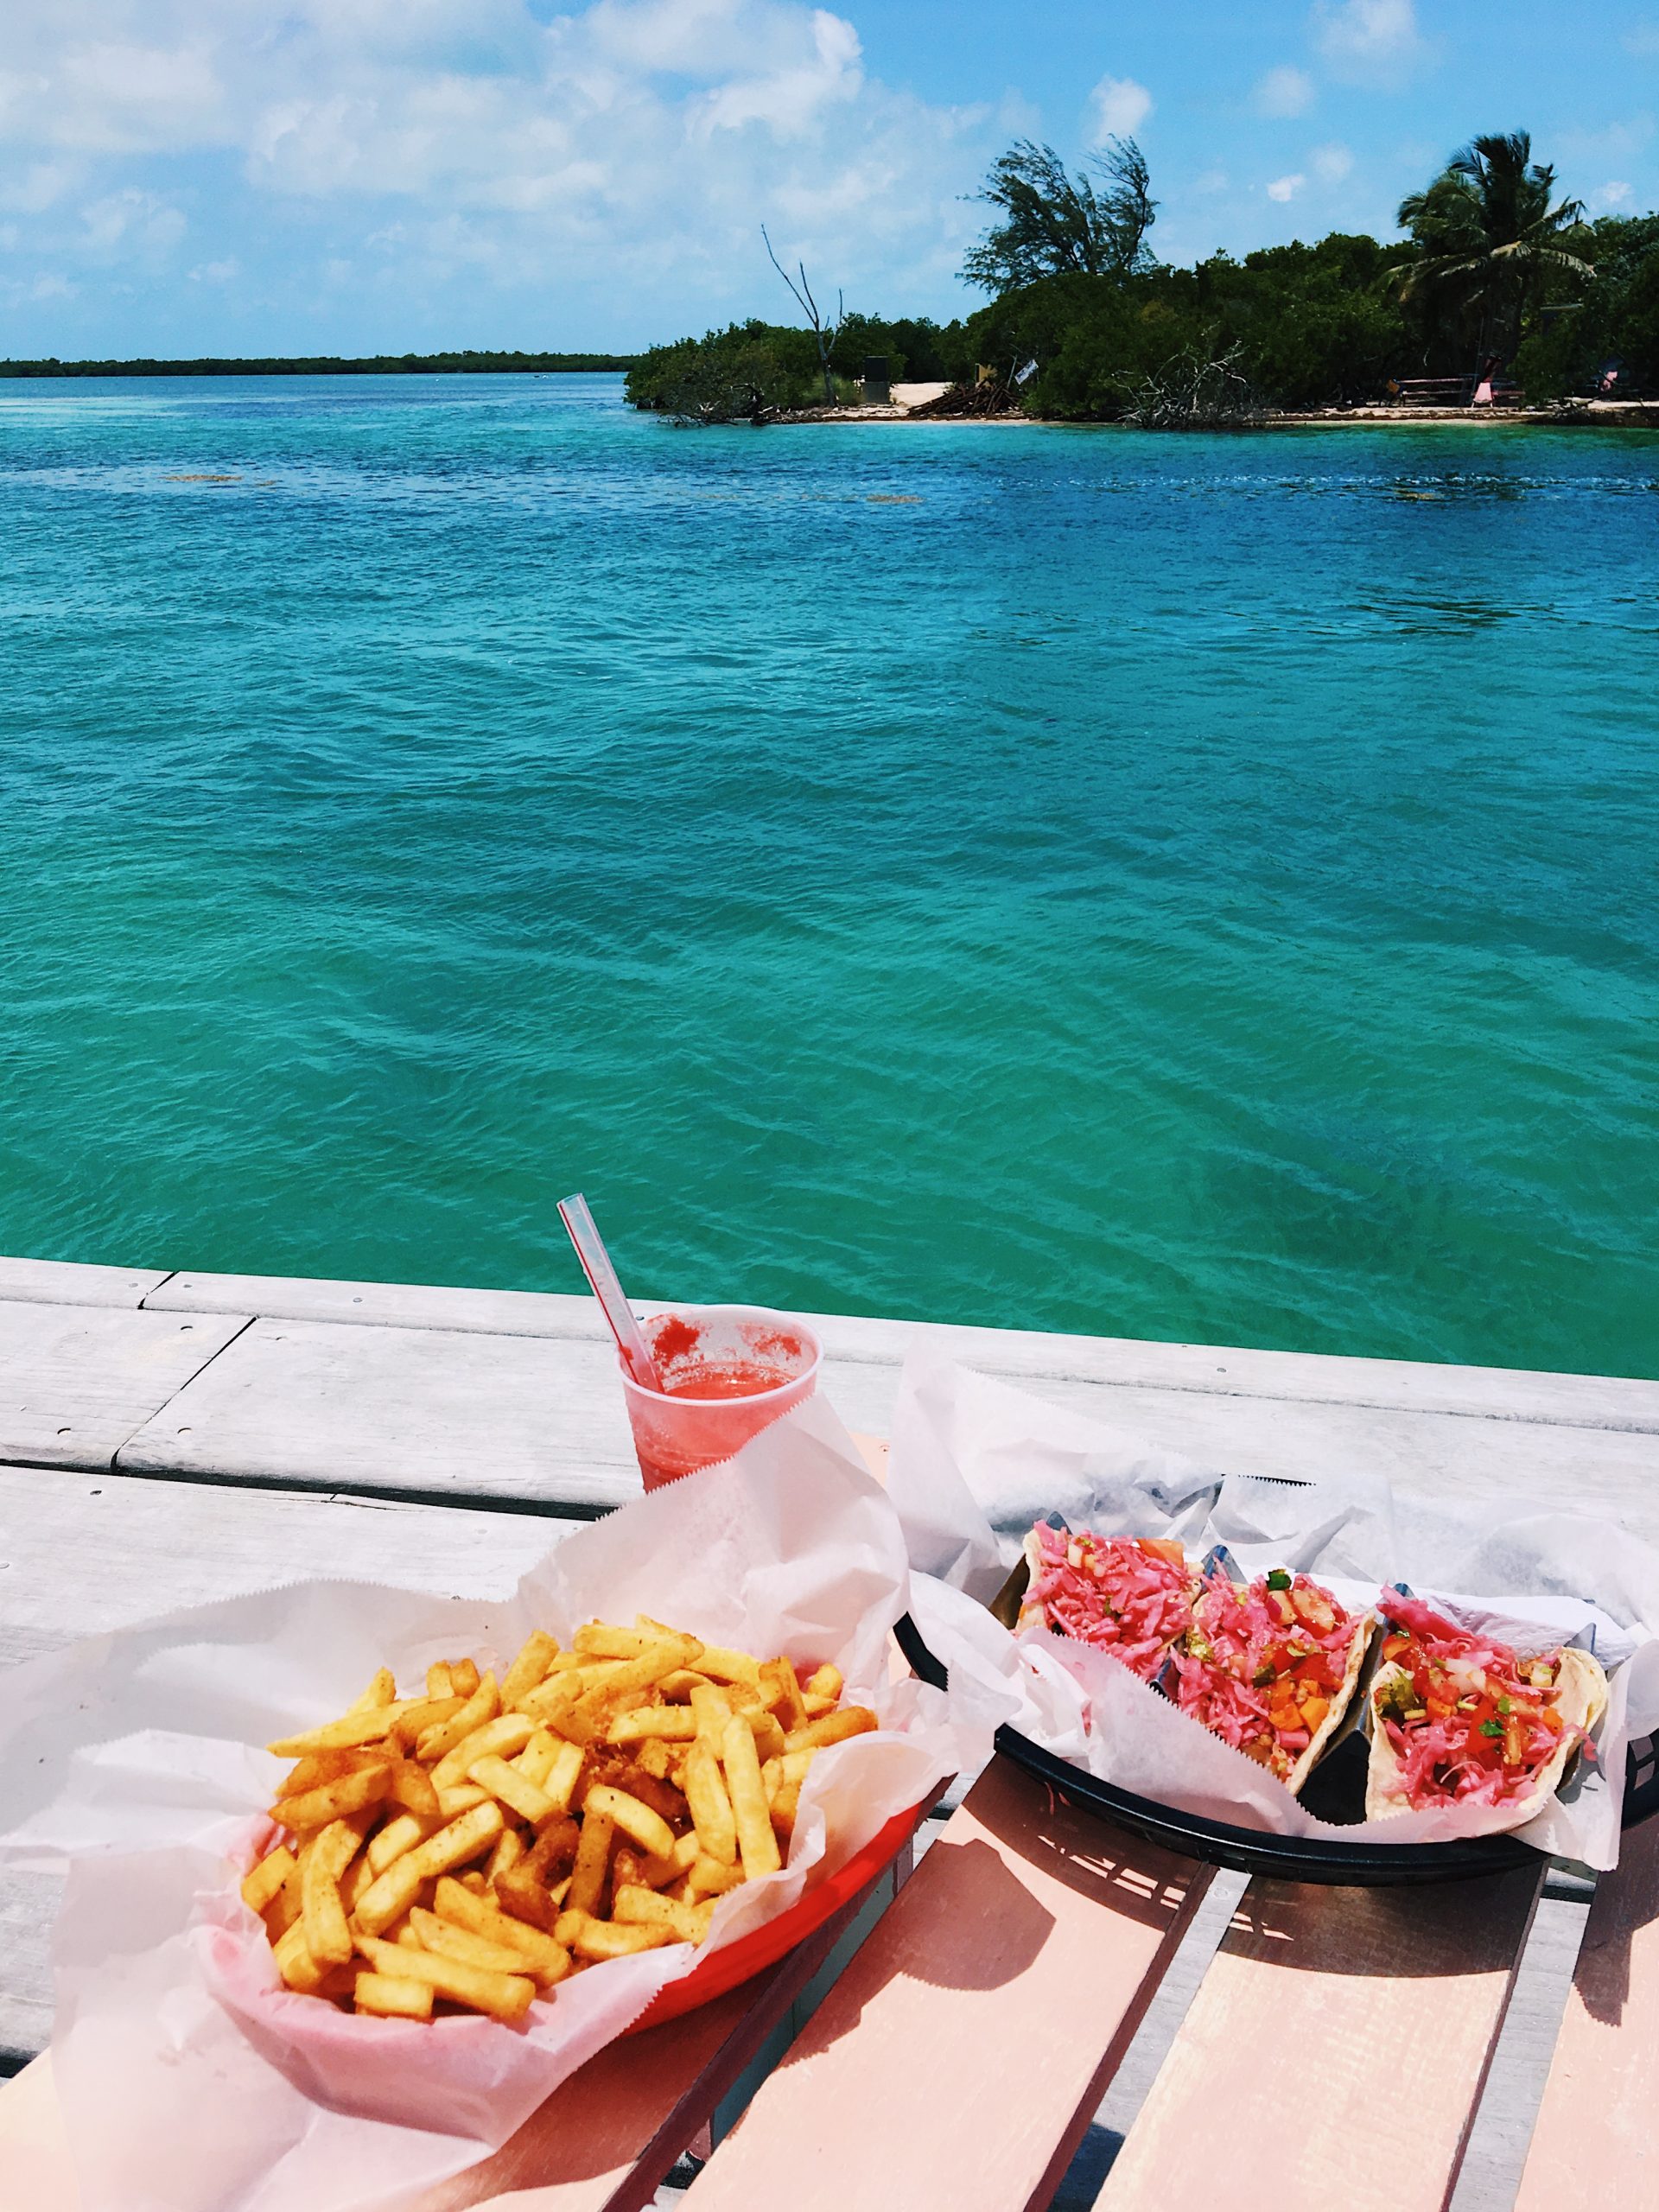 Fries and tacos on the caribbean ocean